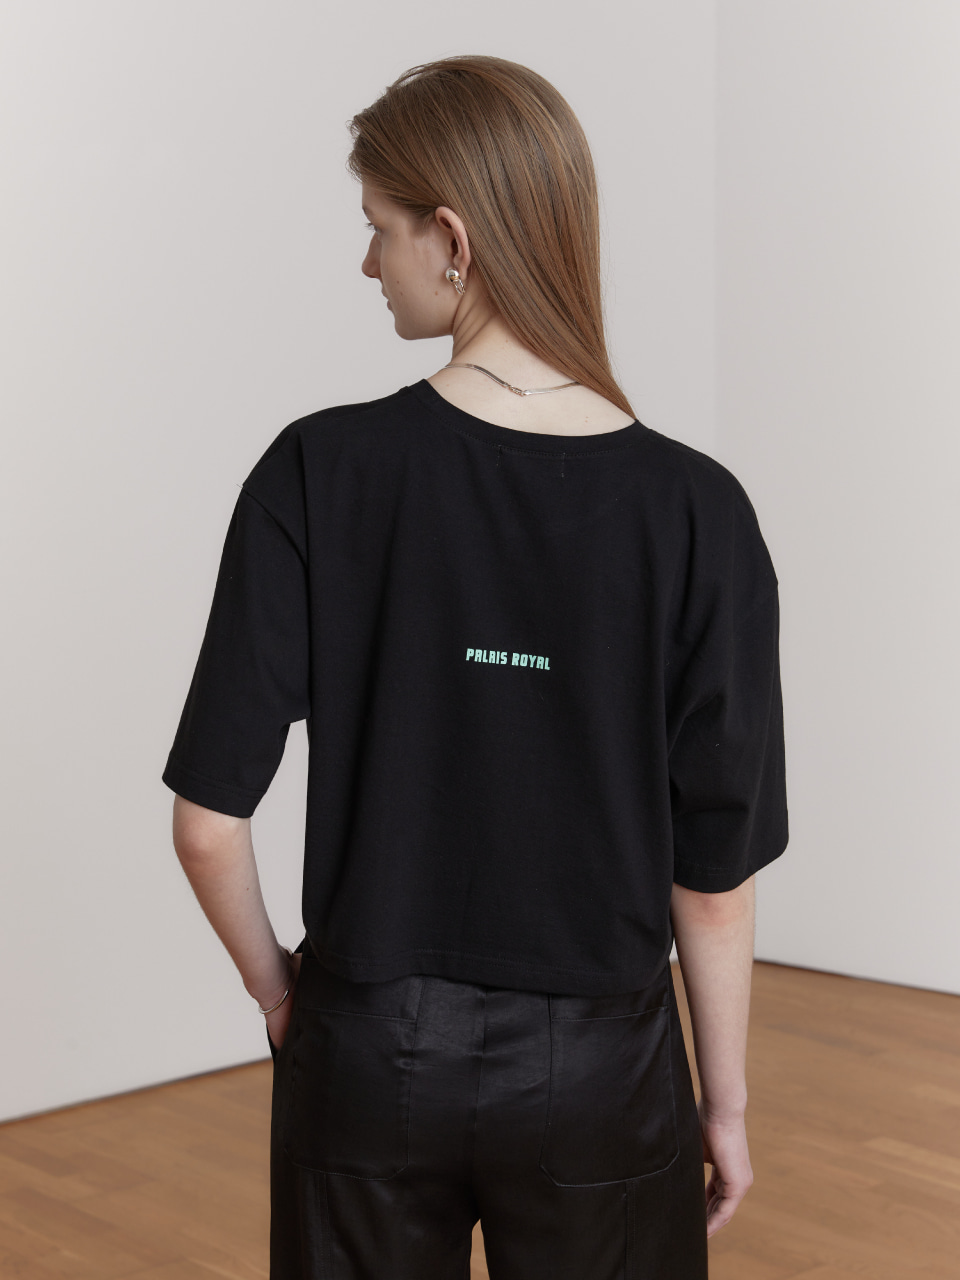 MUSEE DU LOUVRE Embroidered Cotton T-Shirt_Black